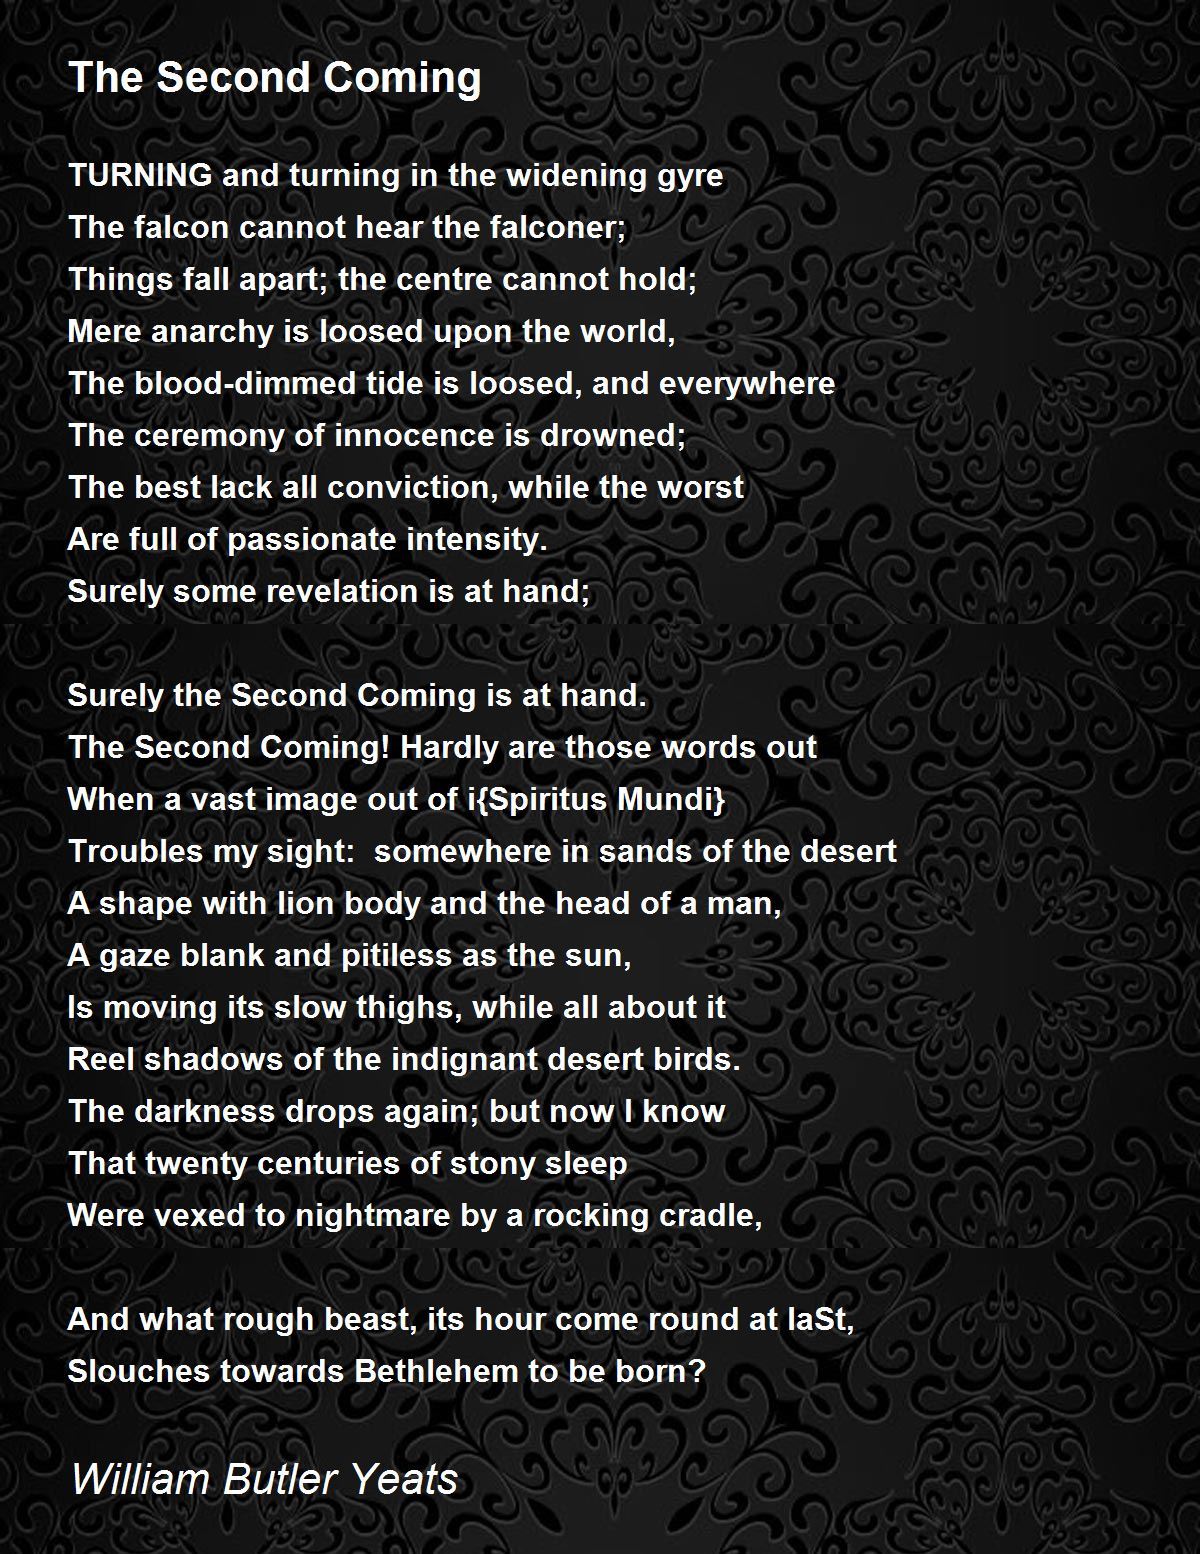 the second coming poem by william butler yeats